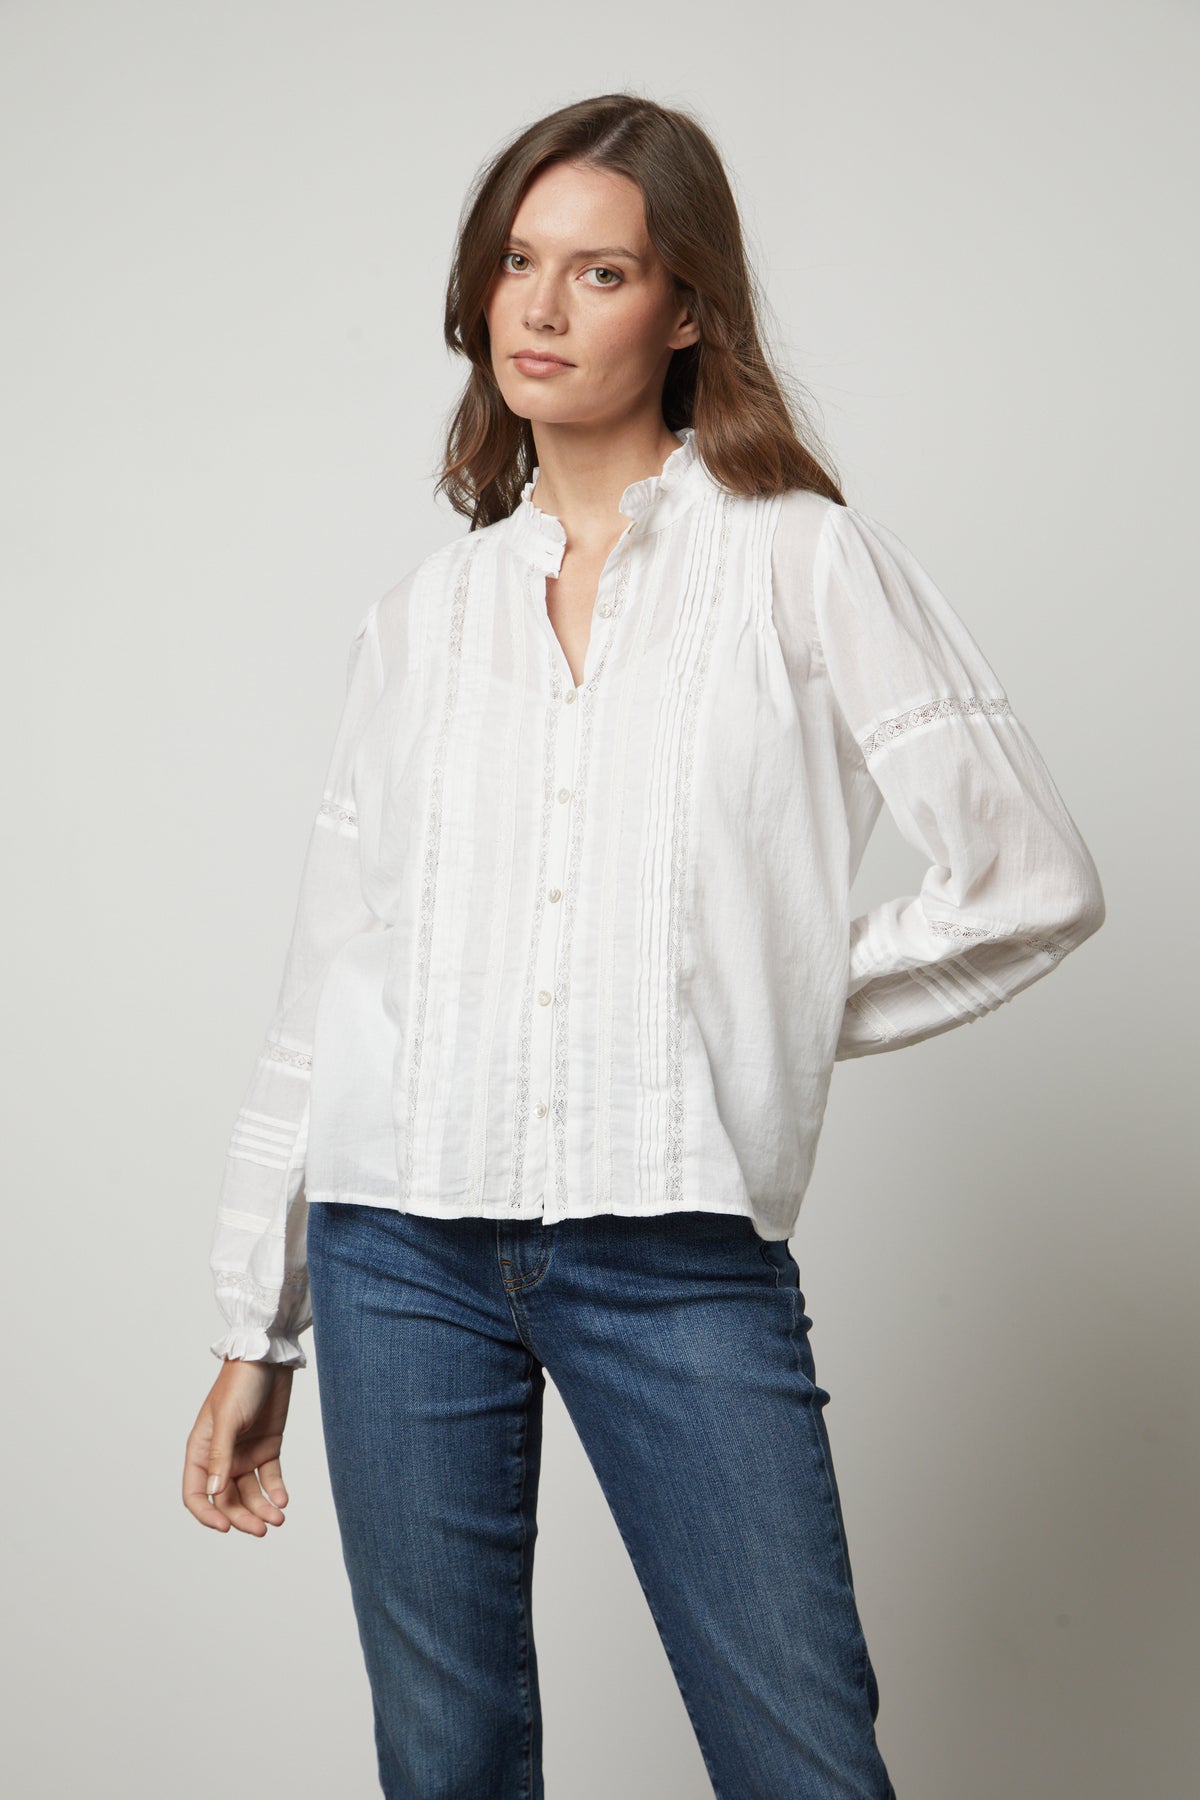 The model is wearing a white ROMY LACE BOHO TOP blouse and jeans by Velvet by Graham & Spencer.-26834995609793